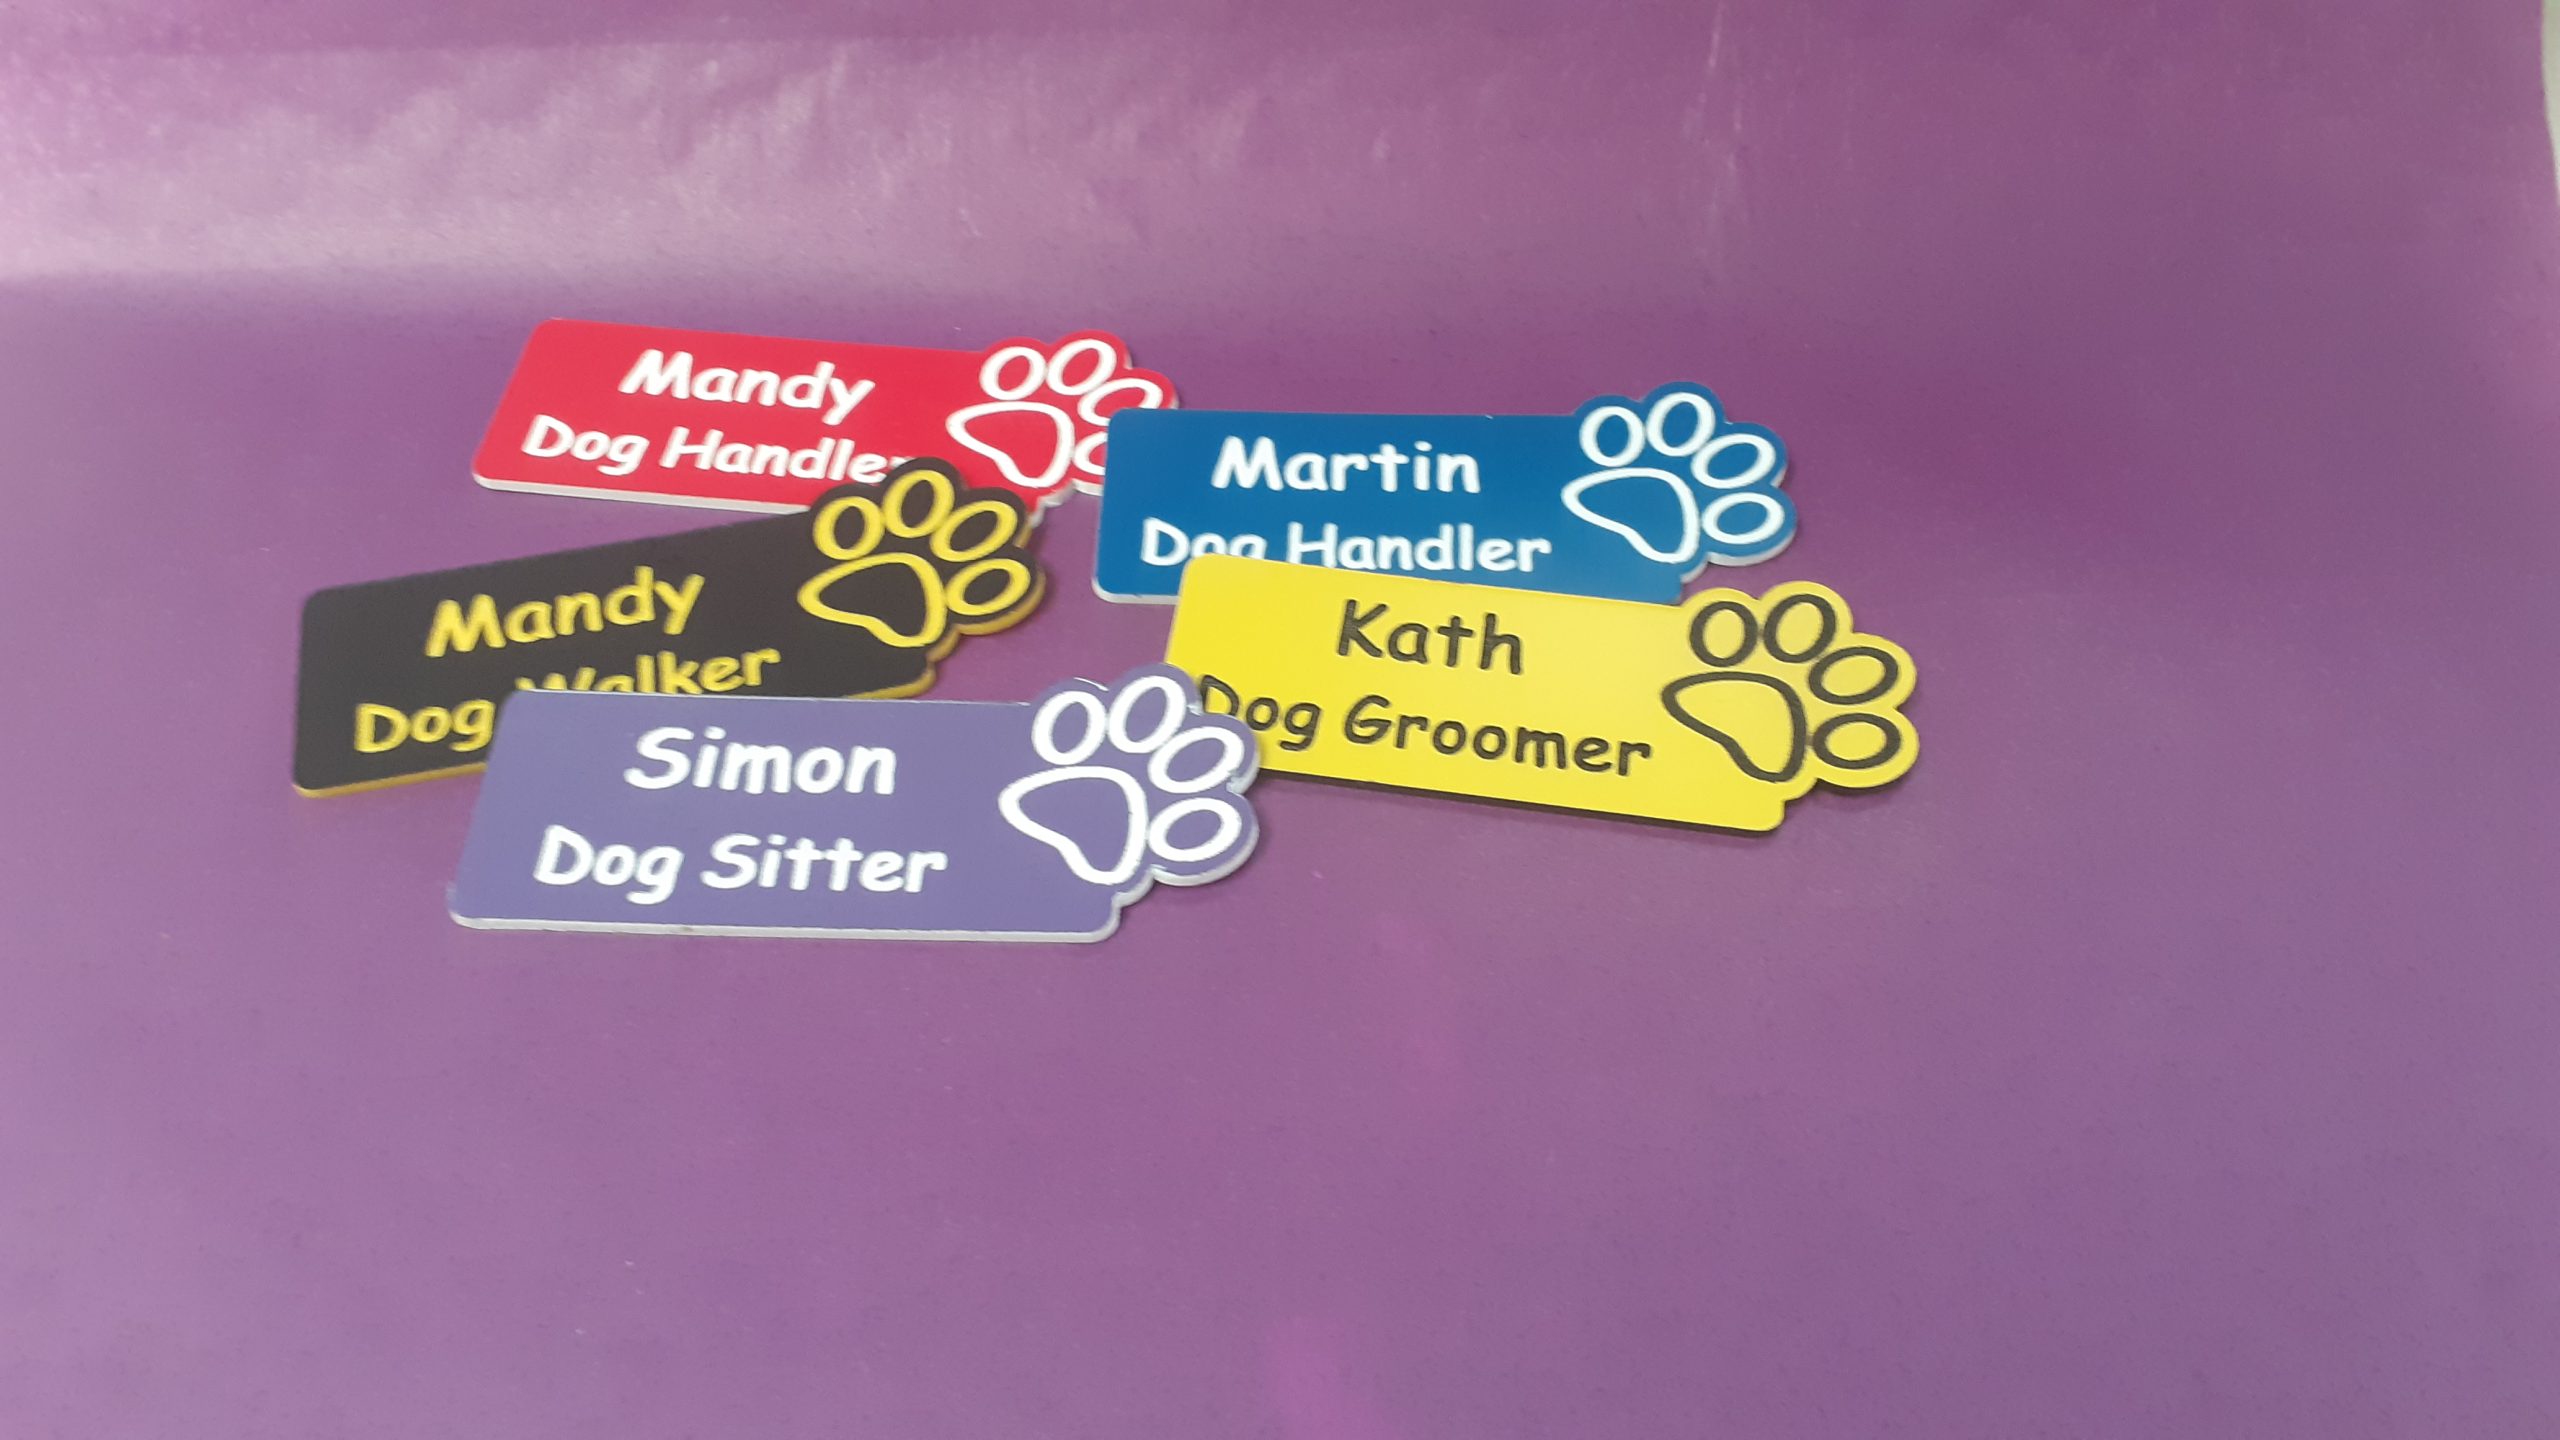 A collection of vibrant and diverse name badges, each uniquely coloured in shades such as blue, red, green, and yellow. The badges are designed with a paw print on the right-hand side of the badge.